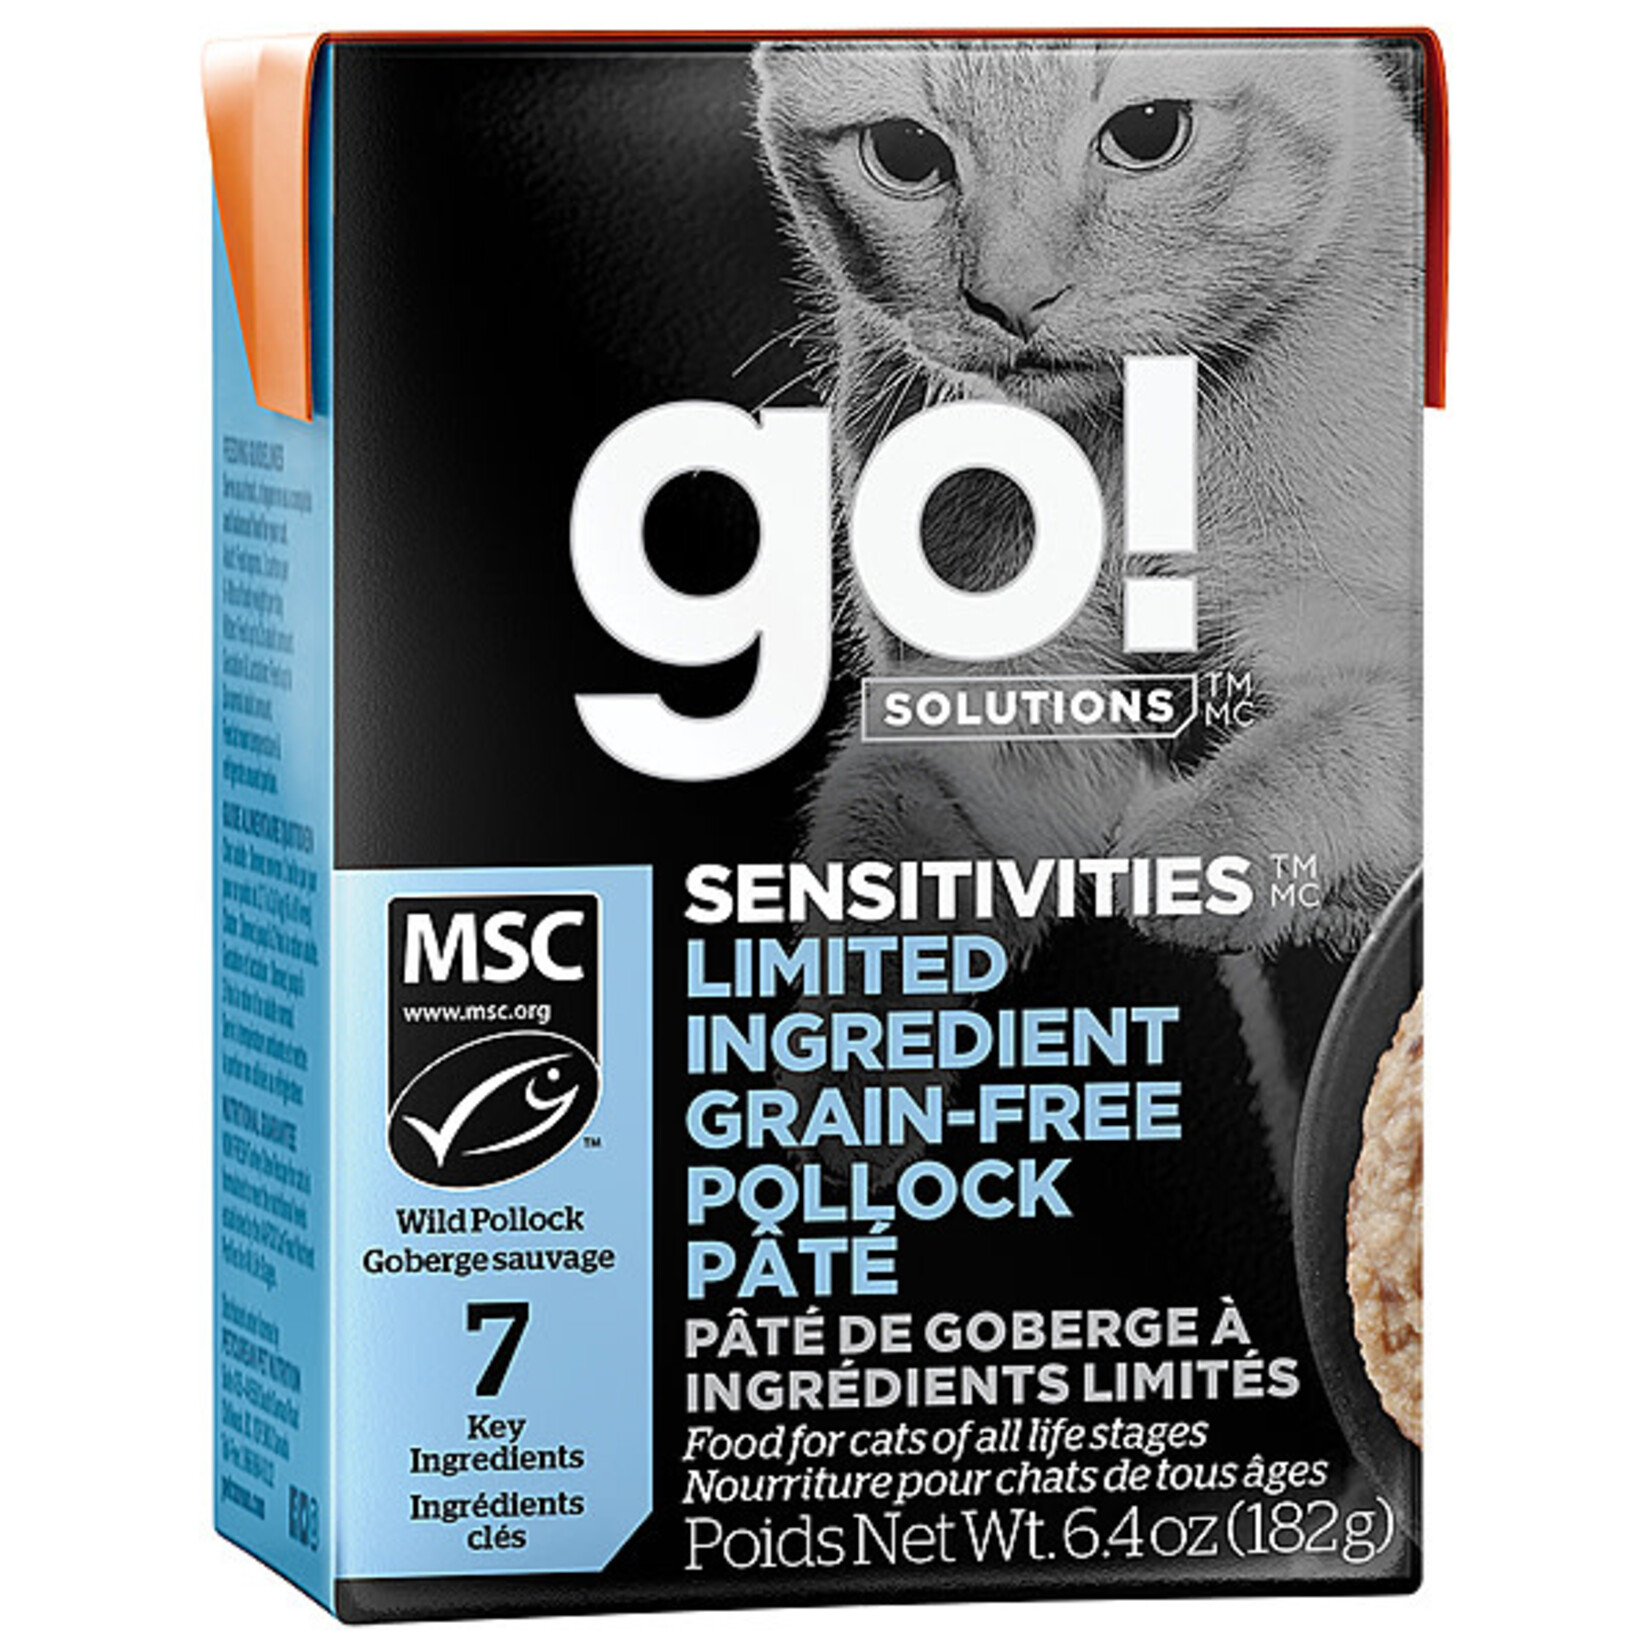 Go! Go! Cat Can sensitivities limited ingredients grain free pollock pate